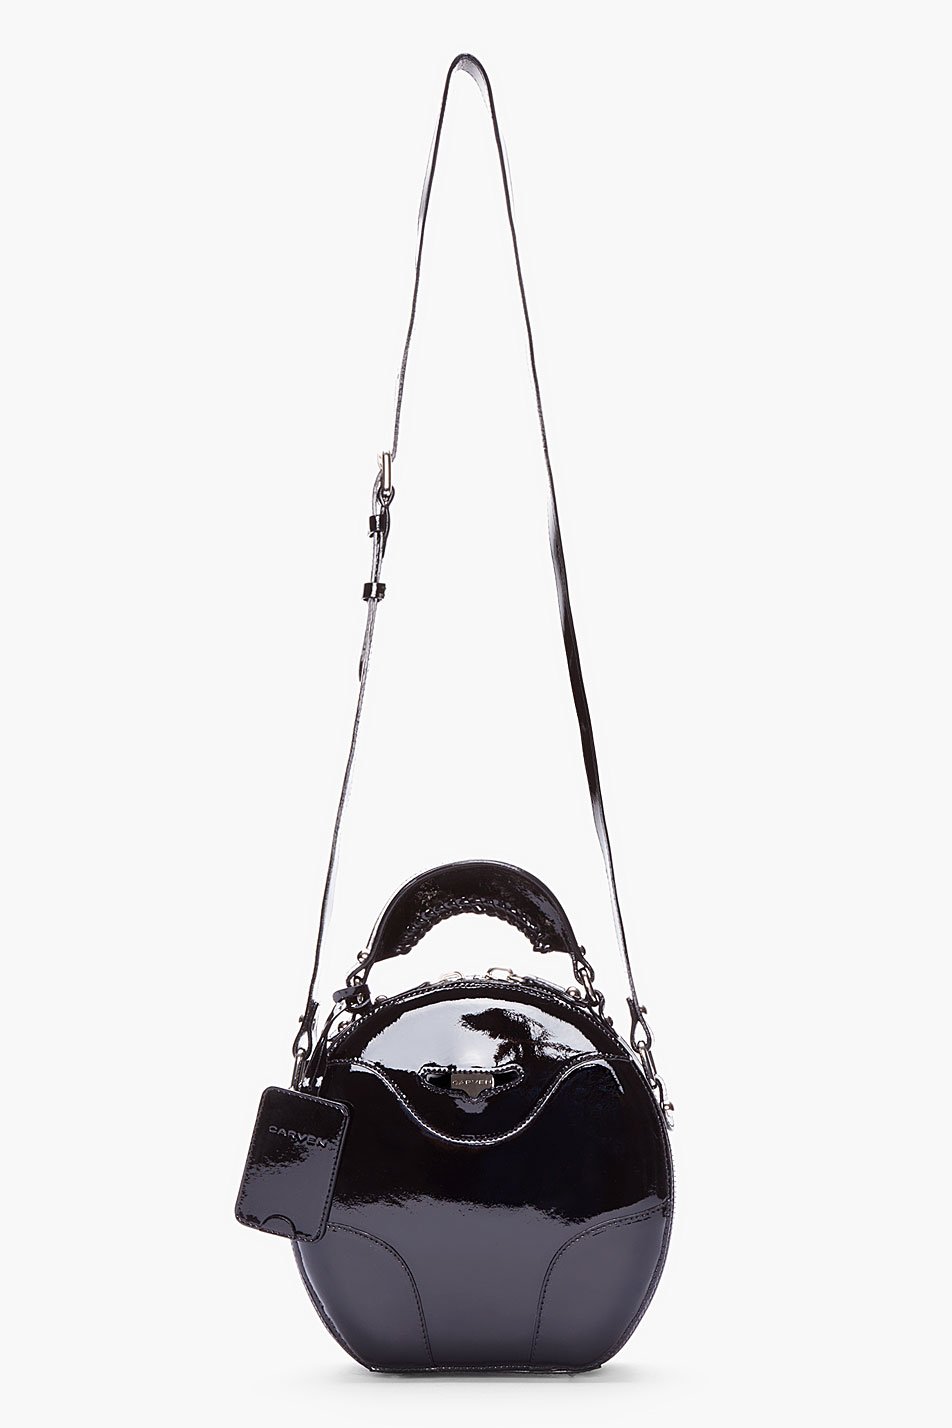 Carven Black Patent Leather Round Bag in Black - Lyst